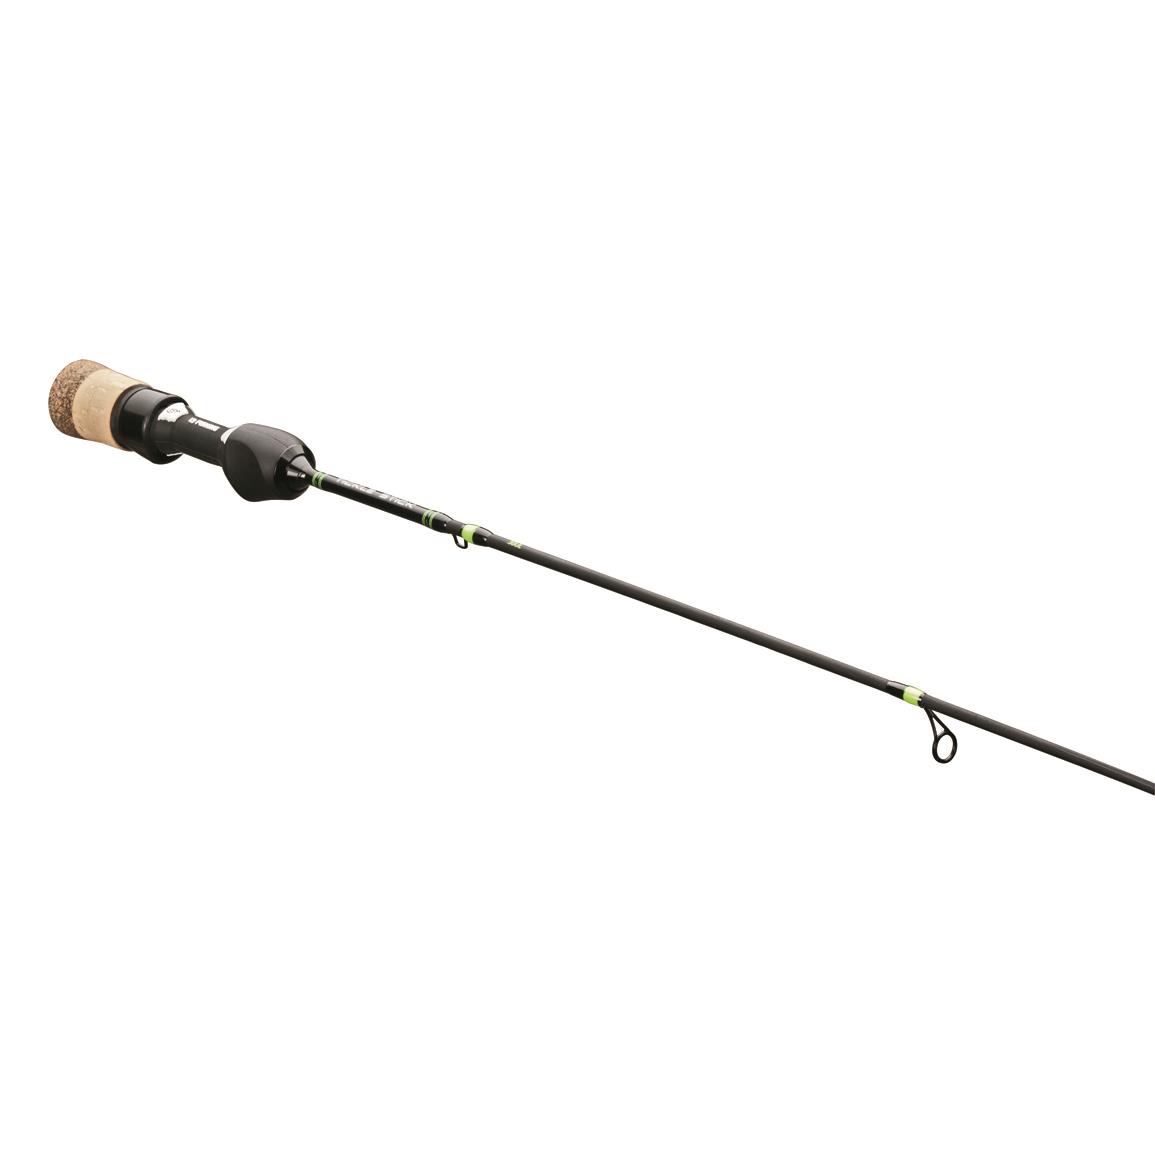 13 Fishing The Snitch Pro Ice Rod 23